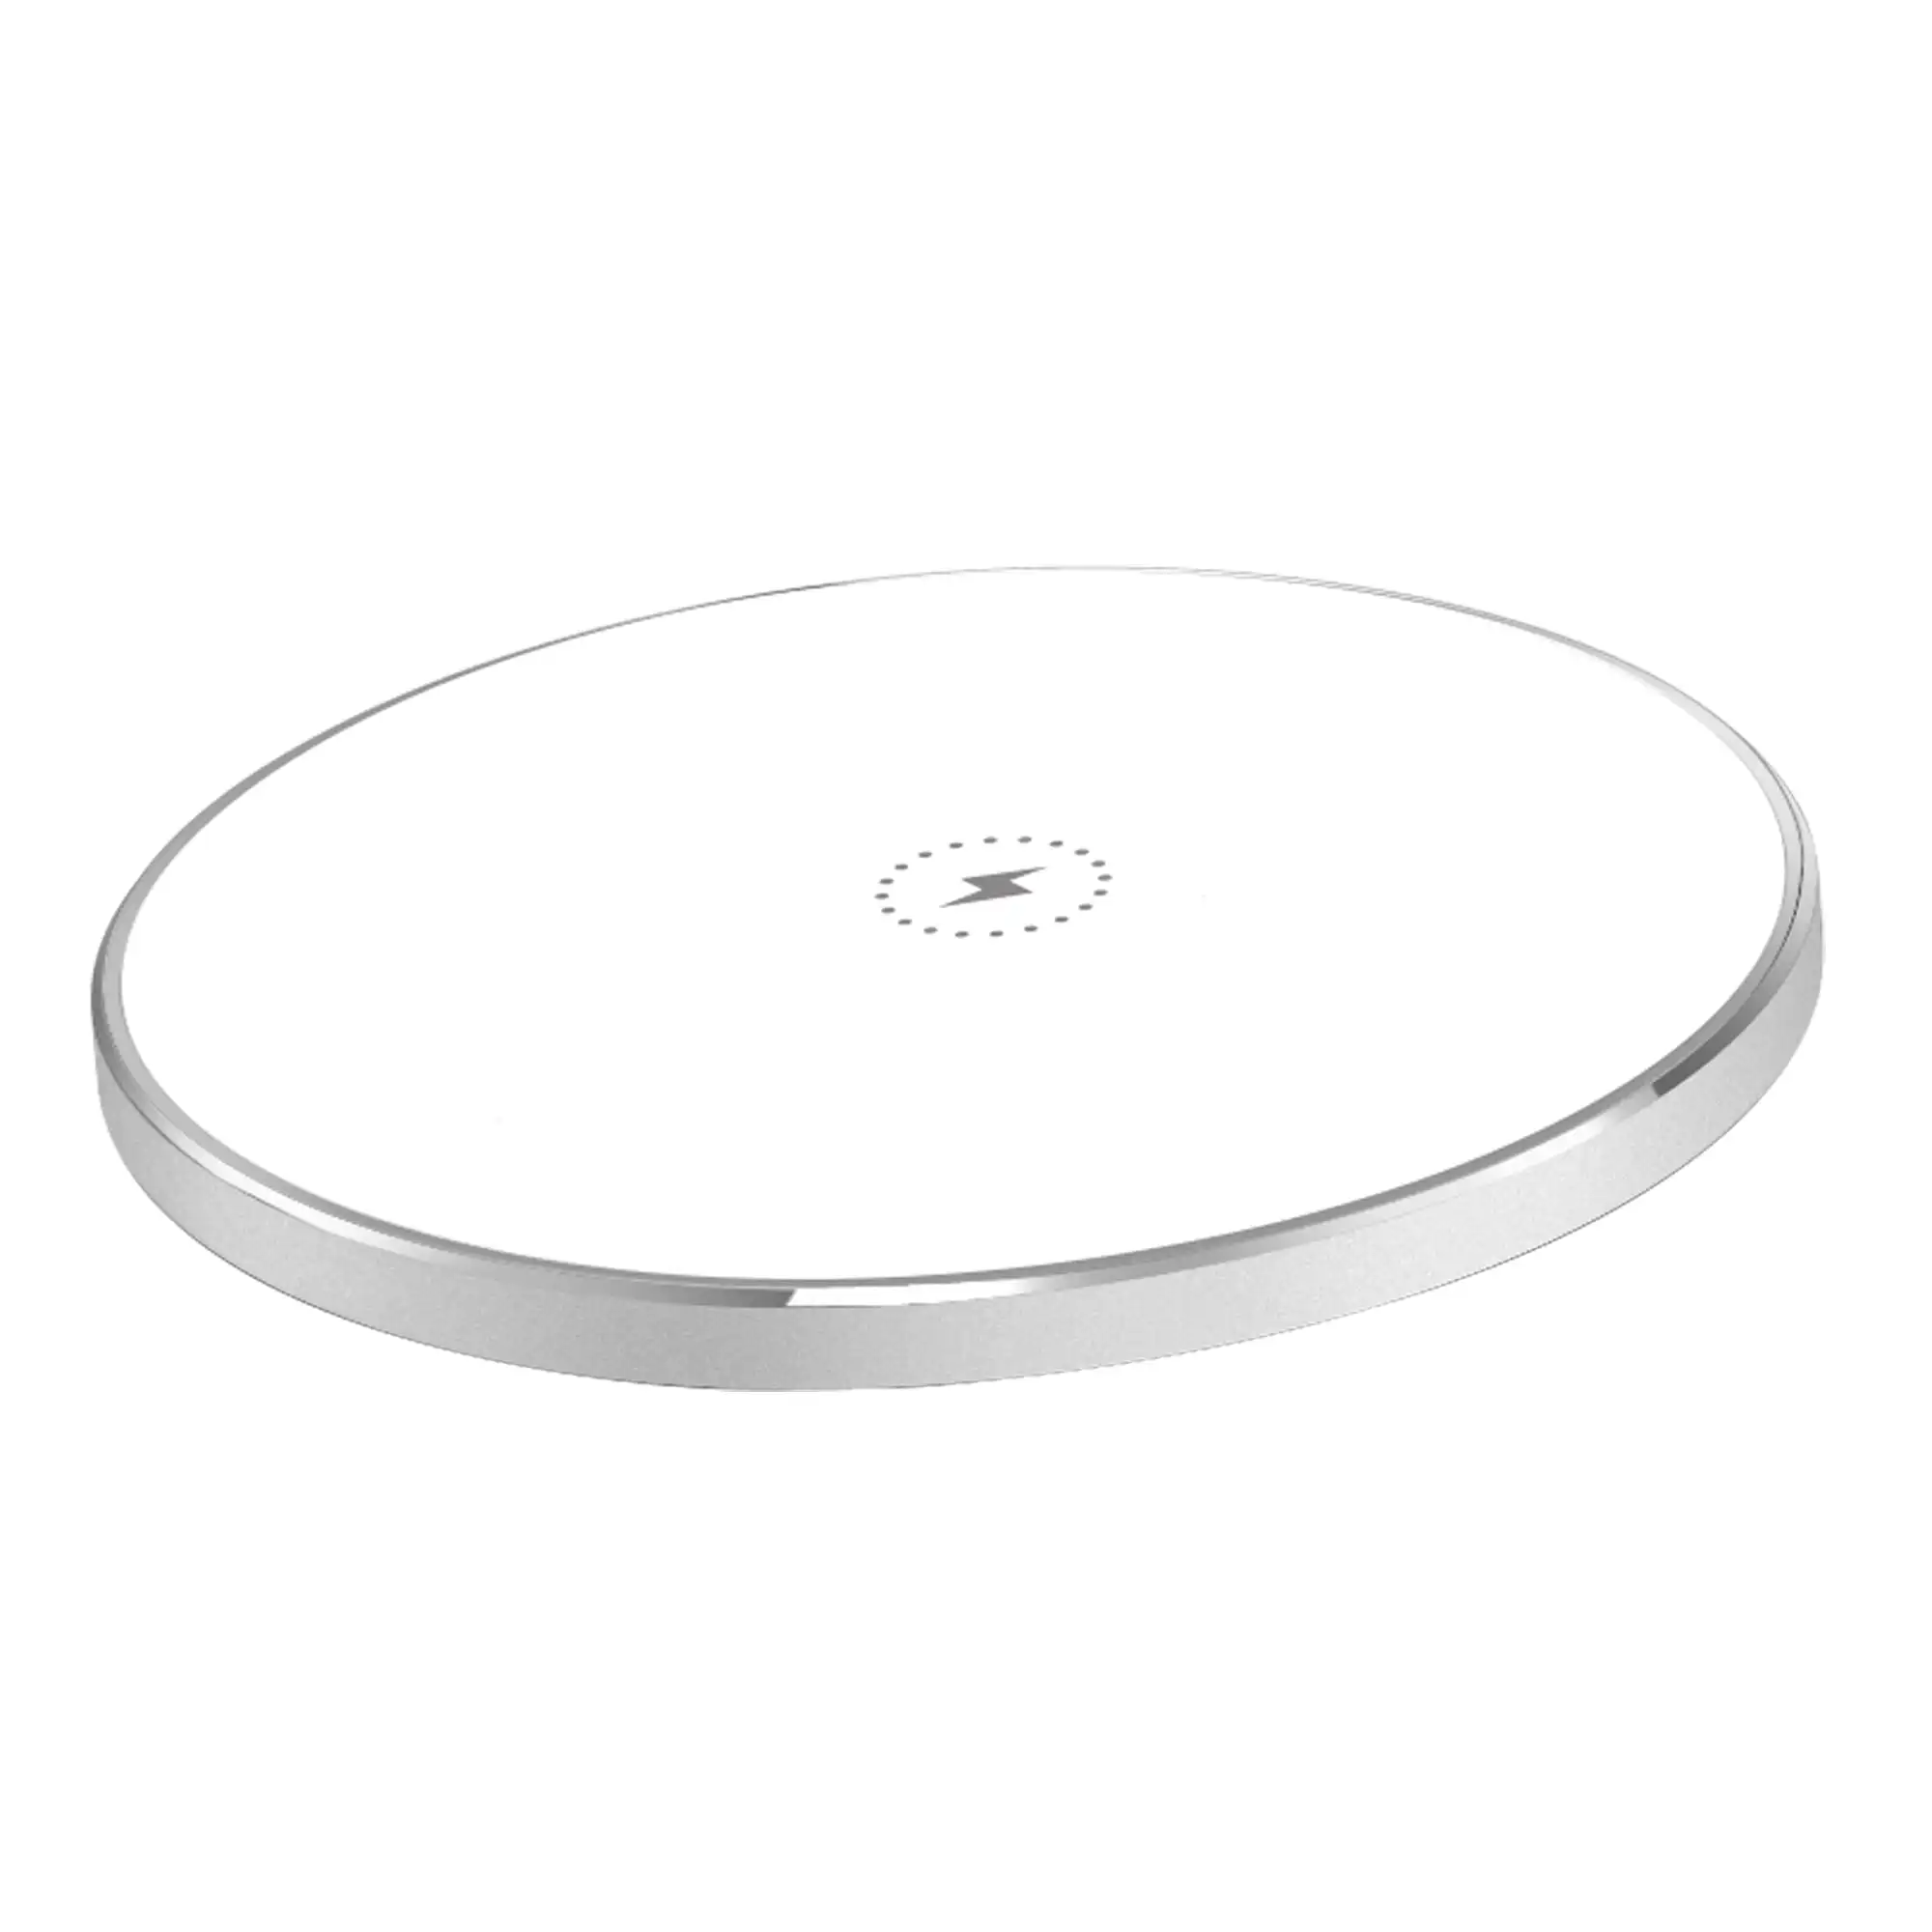 Todo Fast Charging 15W Wireless Phone Charger Pad Charge - White